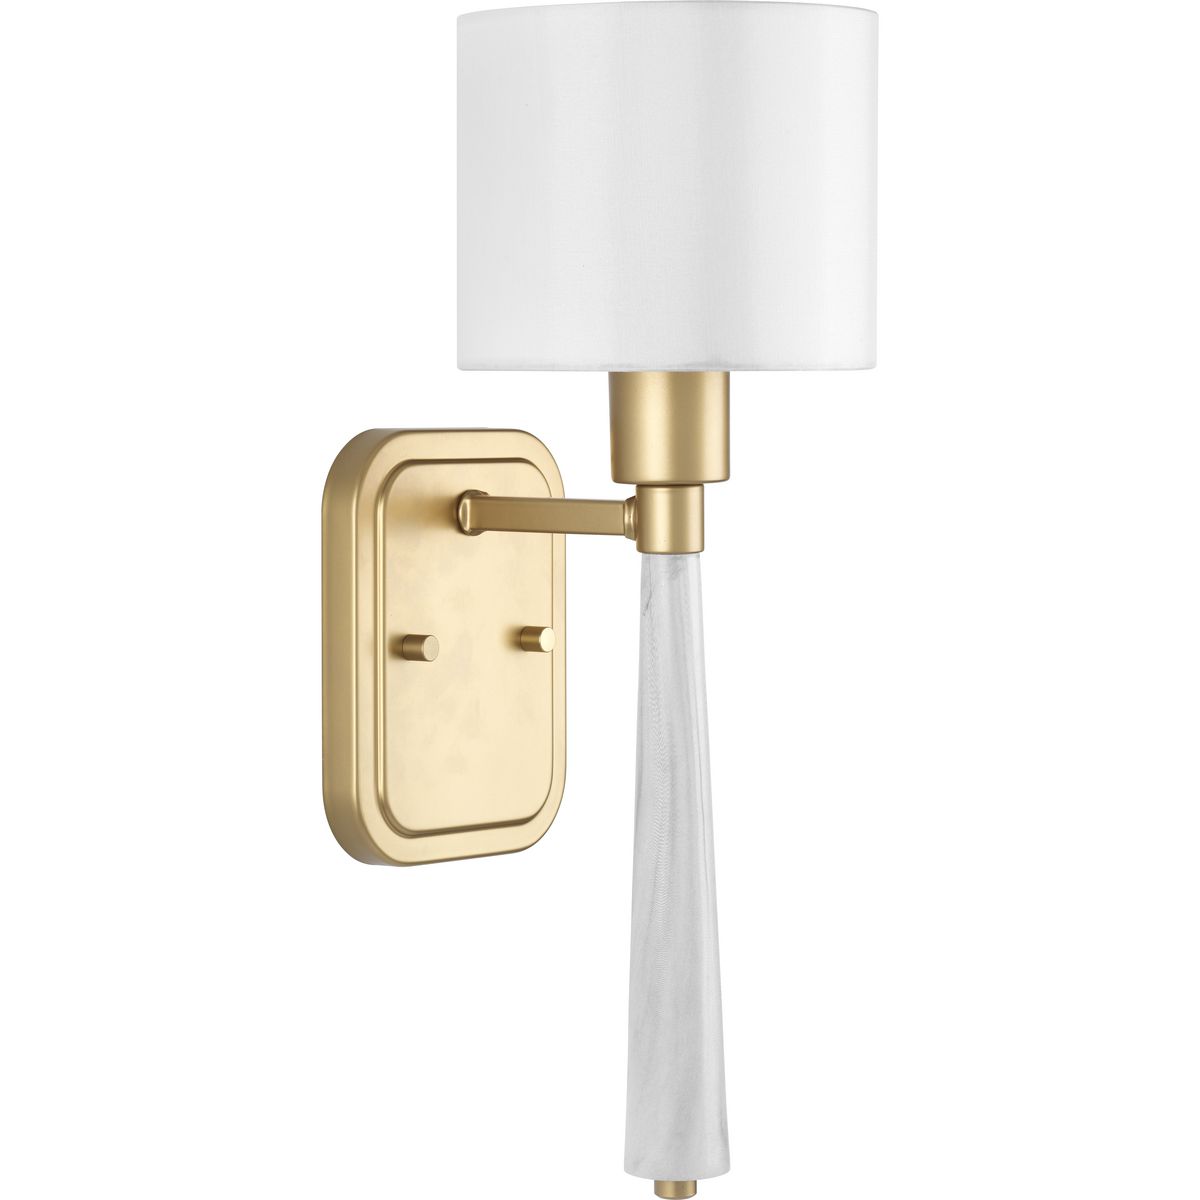 An intriguing fashion-forward lighting collection, Palacio pairs a Vintage Gold finish with faux white marble torch accent for a stunningly elegant design. White silk shade complement gold accents to create a statement-making style. One-light wall sconce is Ideal for a variety of interiors.